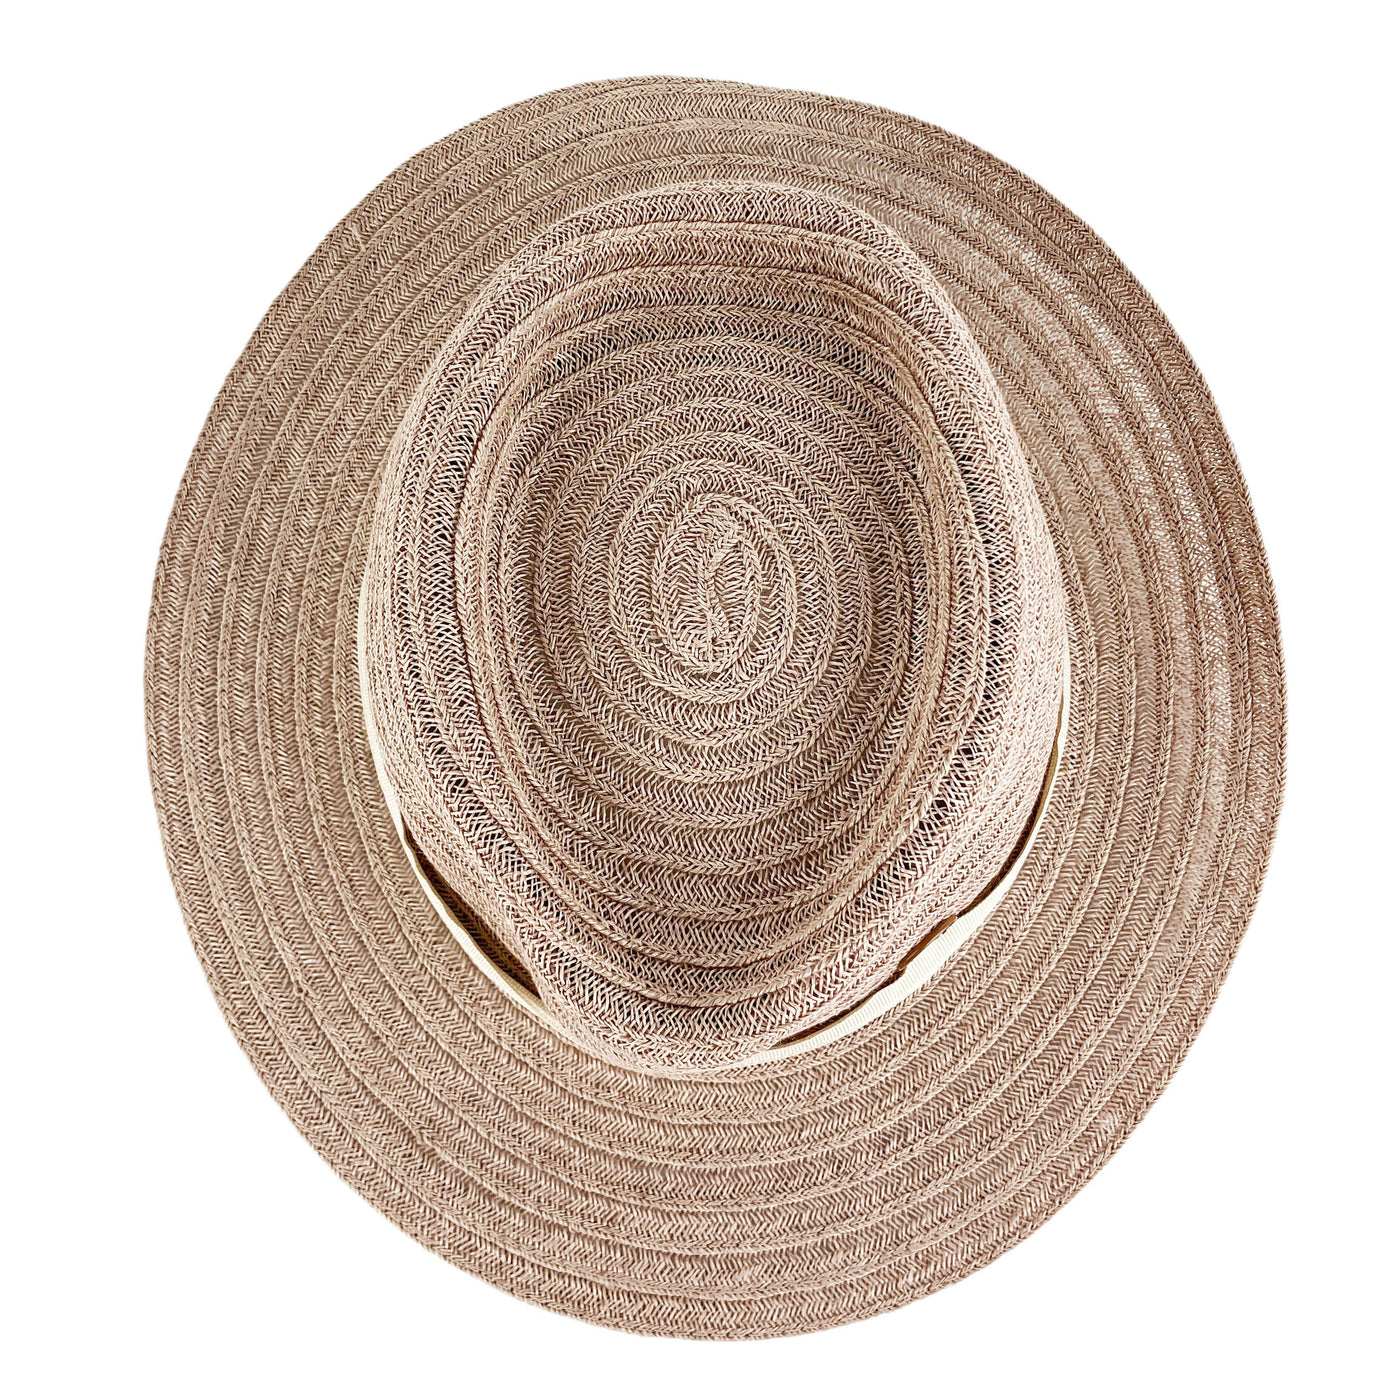 Maison Michel Andre Straw Hat in Beige - Discounts on Maison Michel at UAL